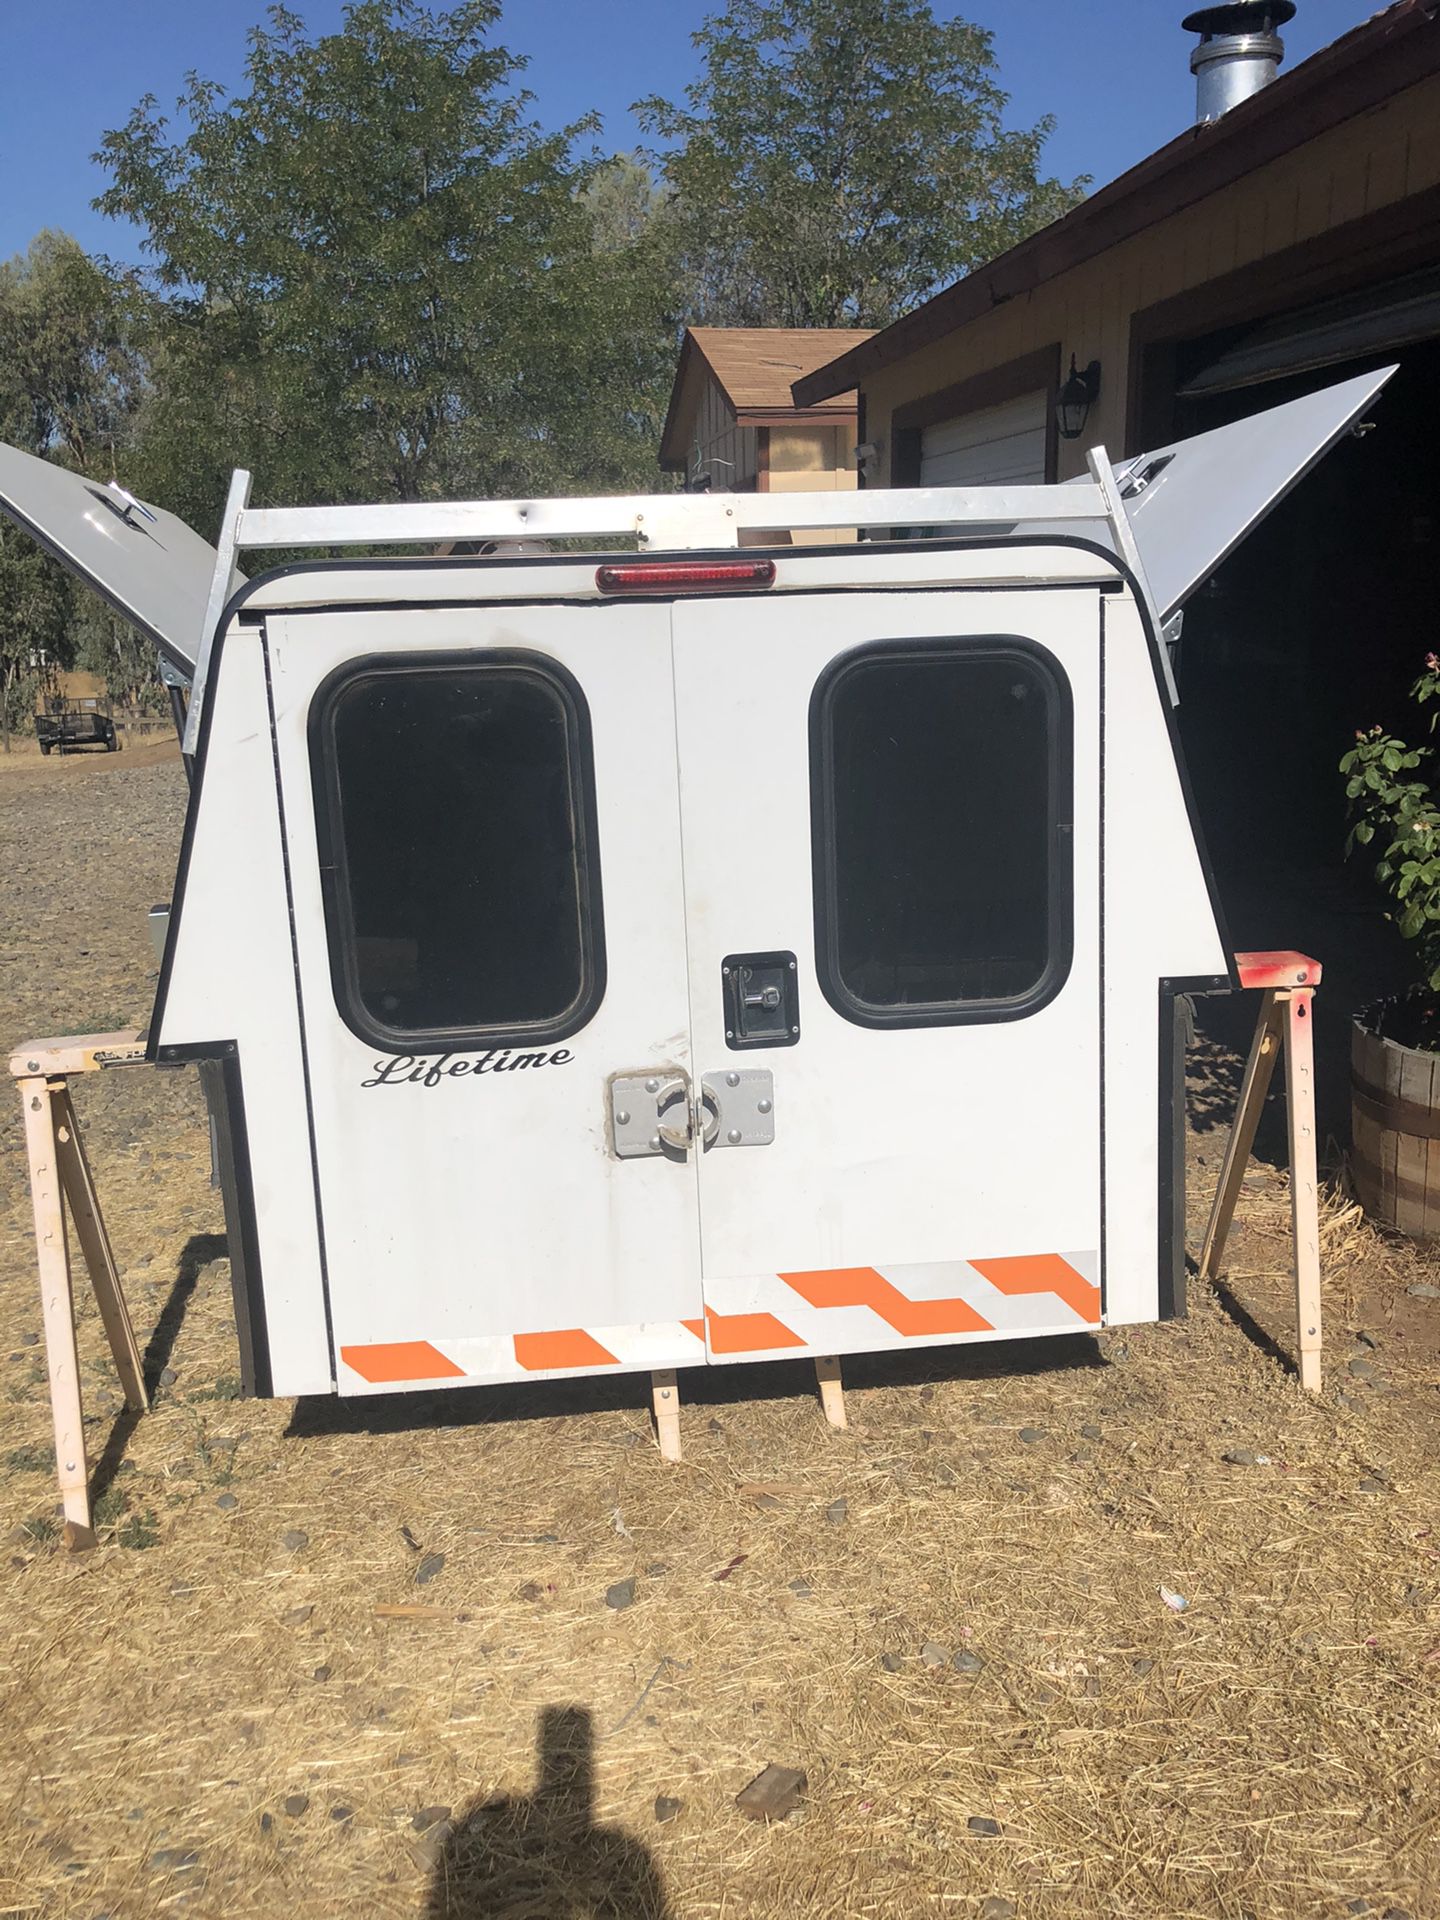 Utility camper shell